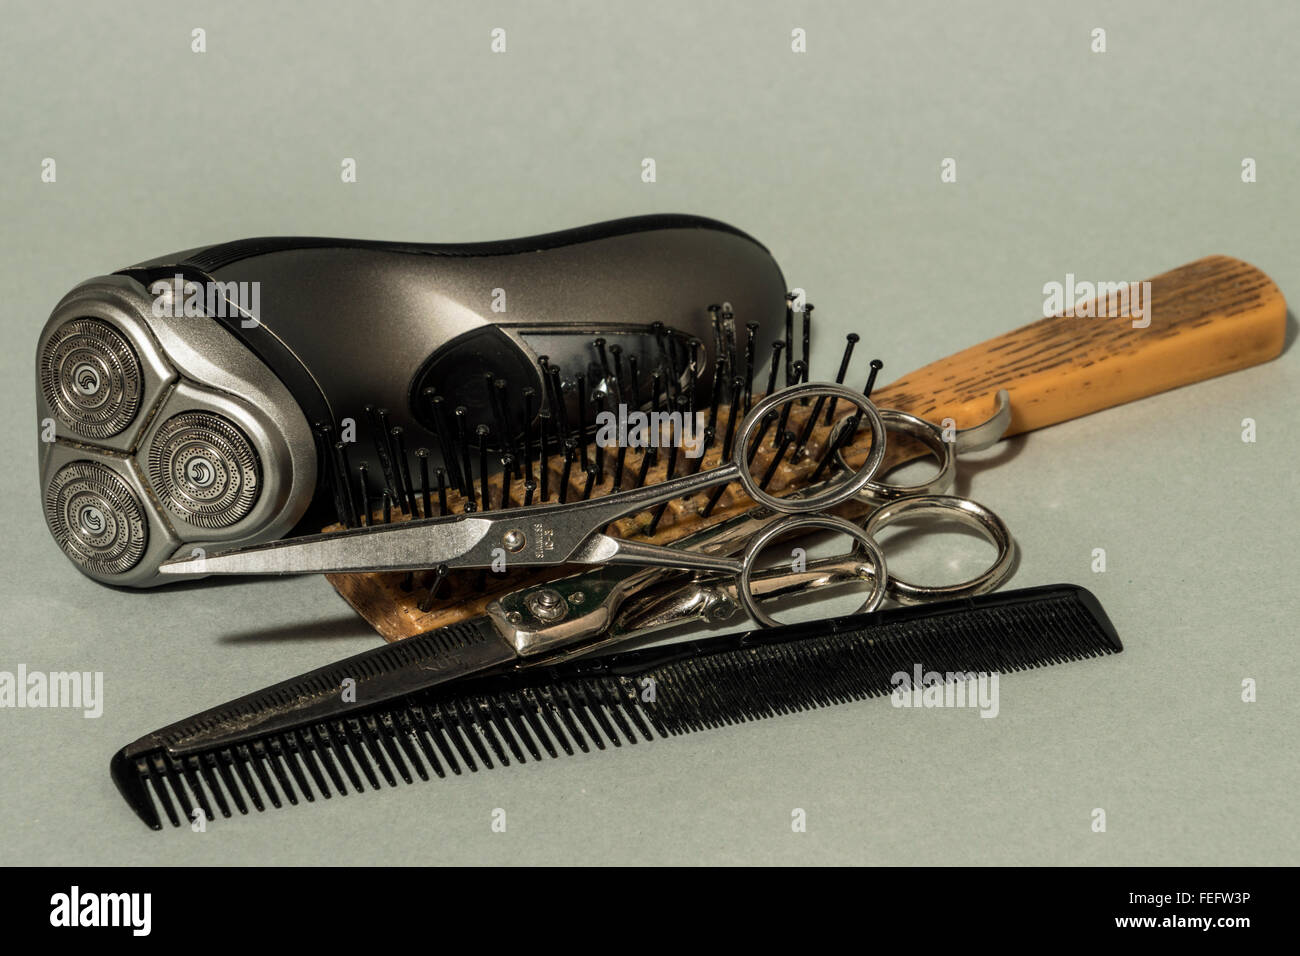 concept grooming devices including comb scissors electric shaver and brush Stock Photo